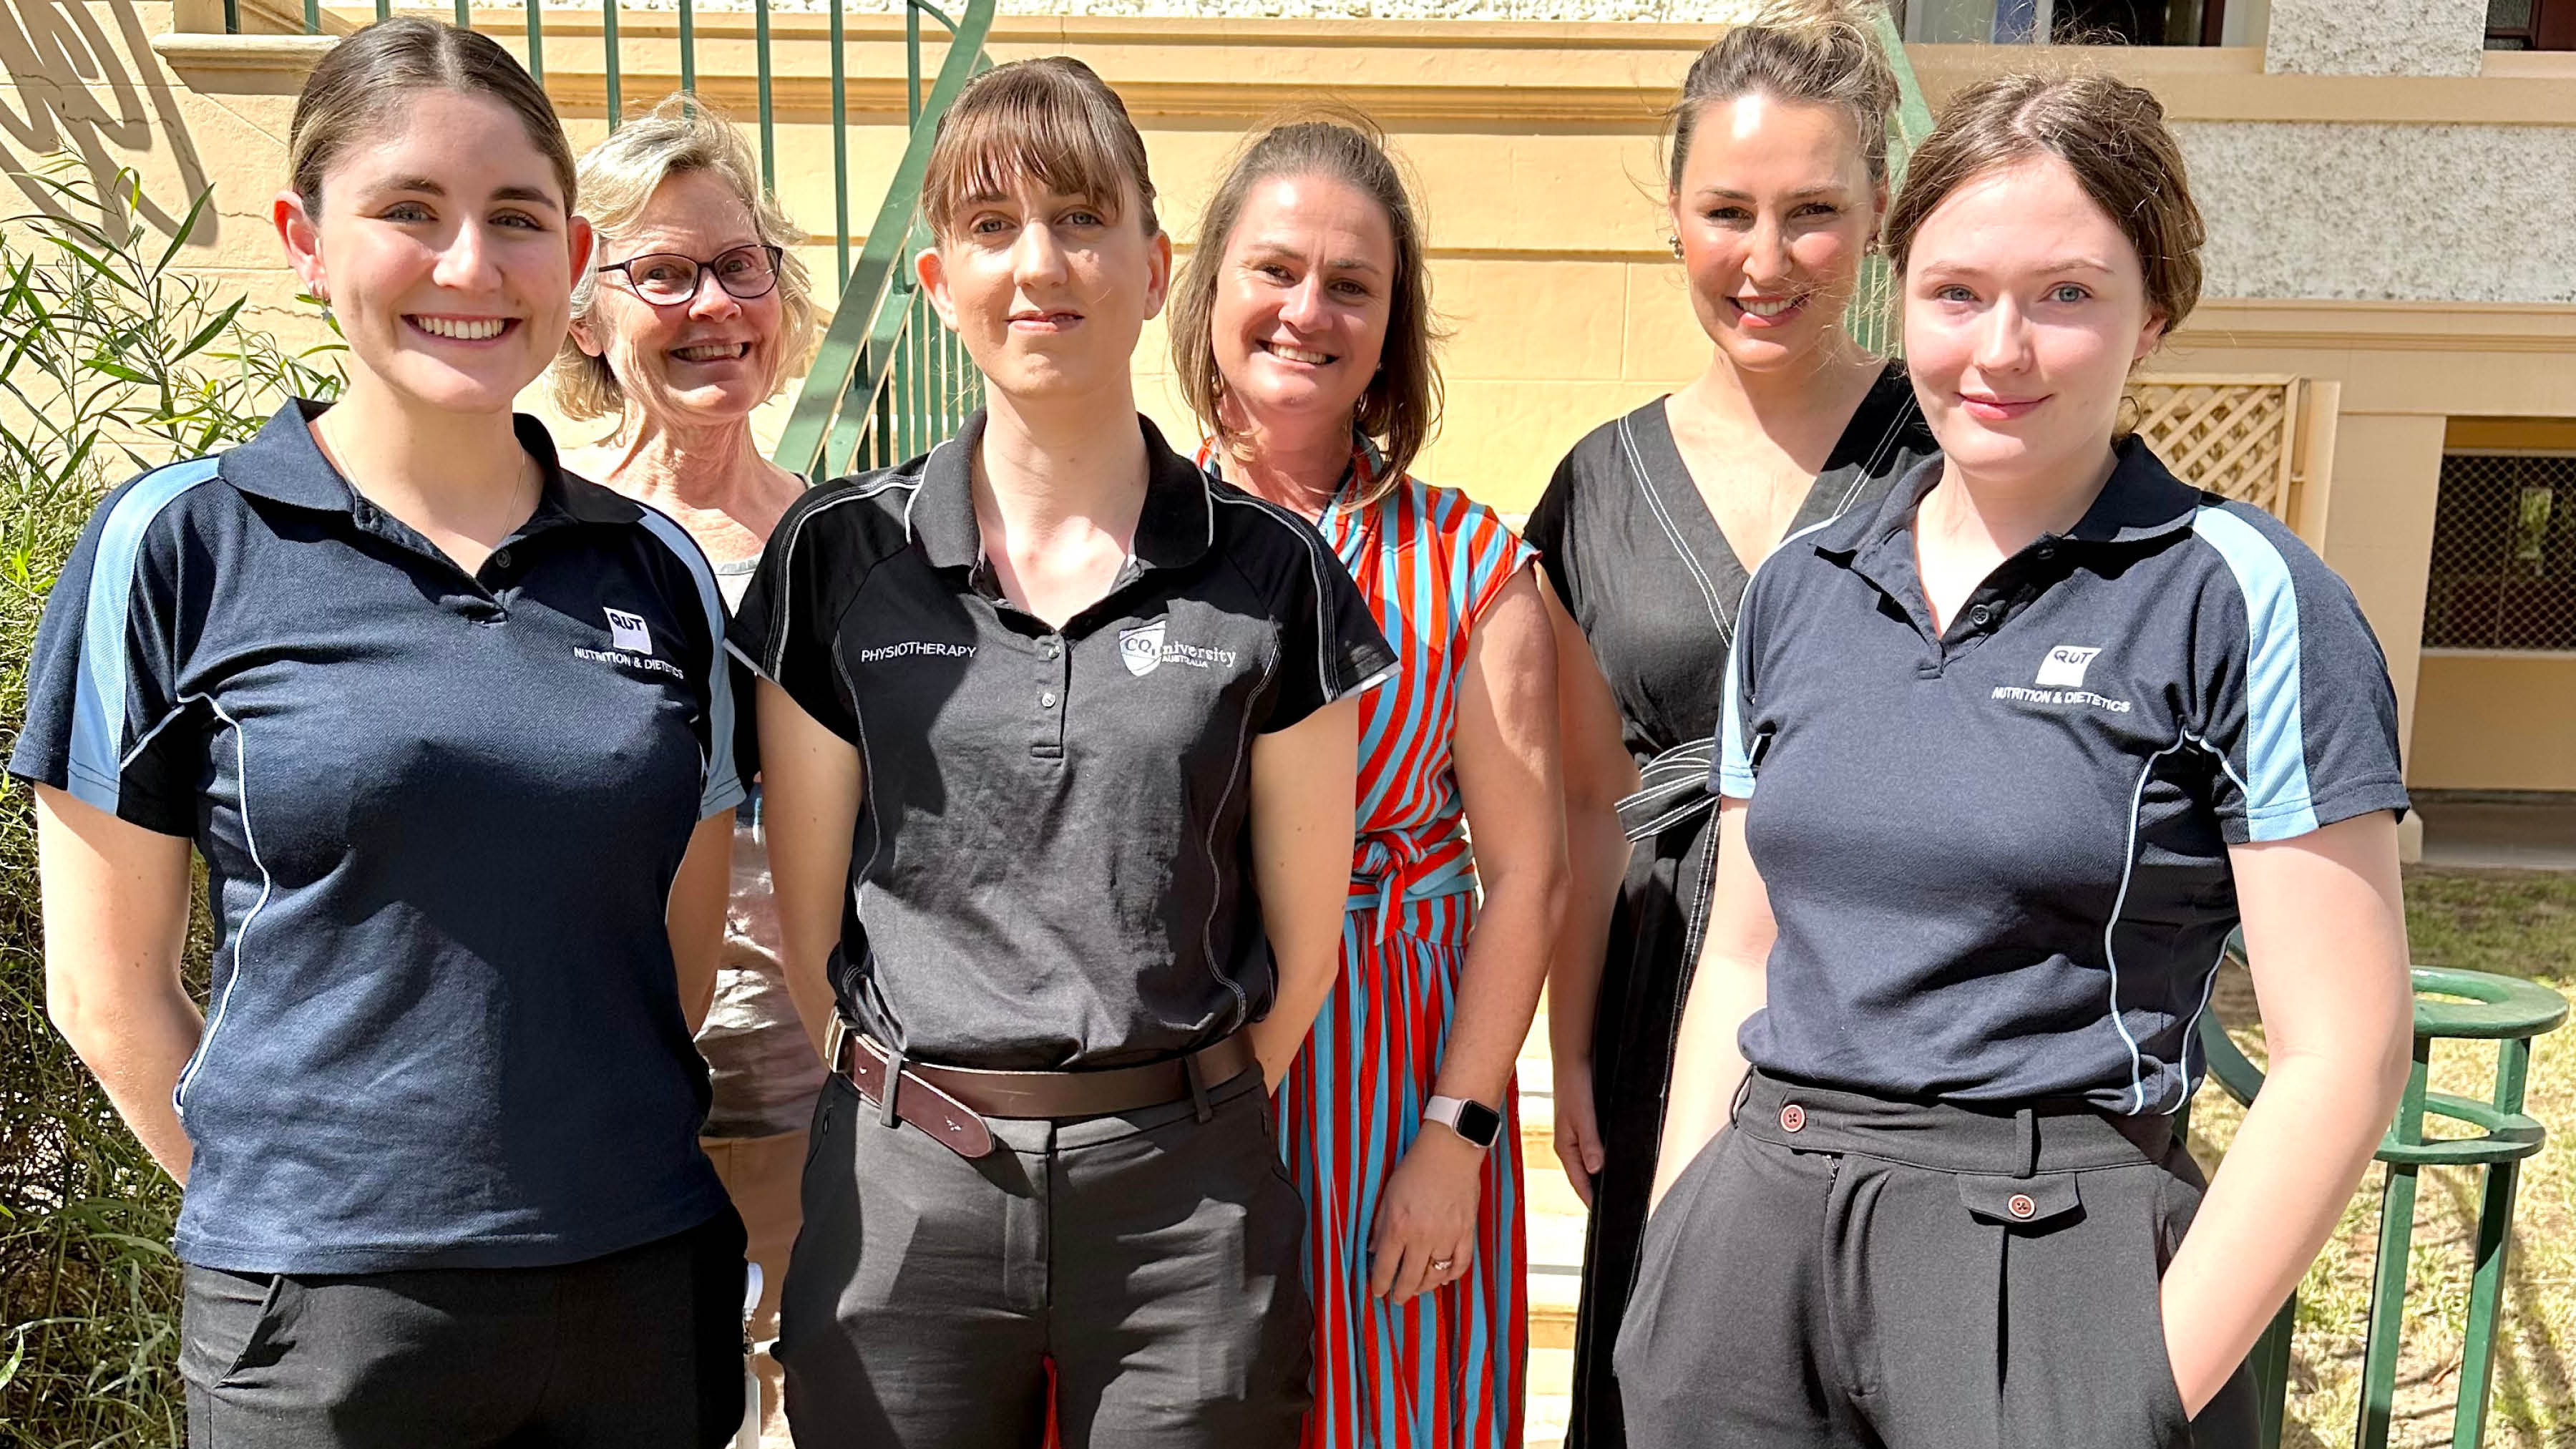 The RIPPAH team at Roma – from left – student dietitian Olivia Raccanello, South West Hospital and Health Service Executive Director Allied Health Helen Wassman, physiotherapy student Laura Rutherford, Clinical Educator Lisa Baker, RIPPAH Program Lead Rhiannon Barnes and student dietitian Matisse Tisdell.